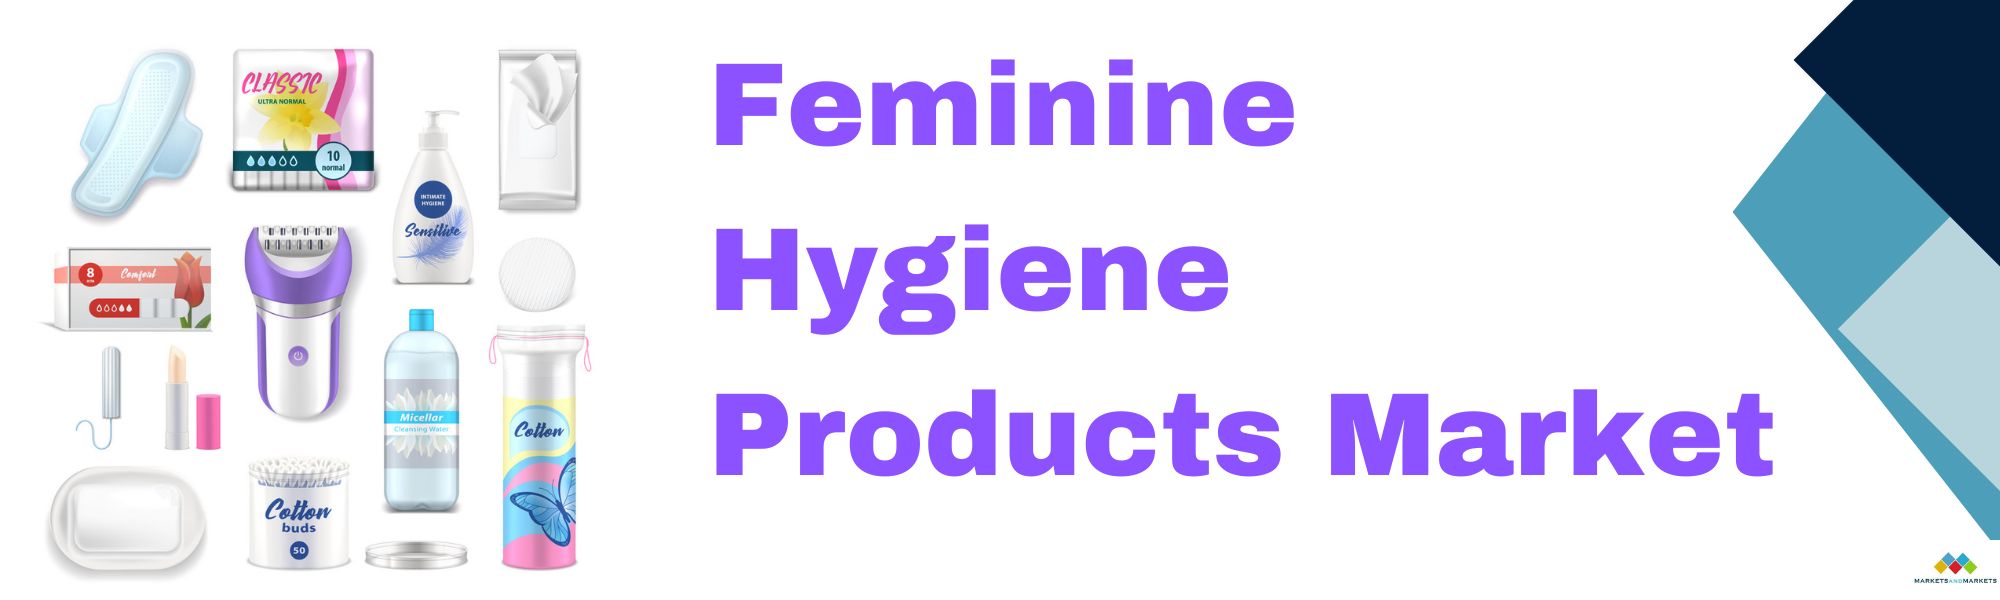 Period protection and feminine hygiene has had a sustainable and